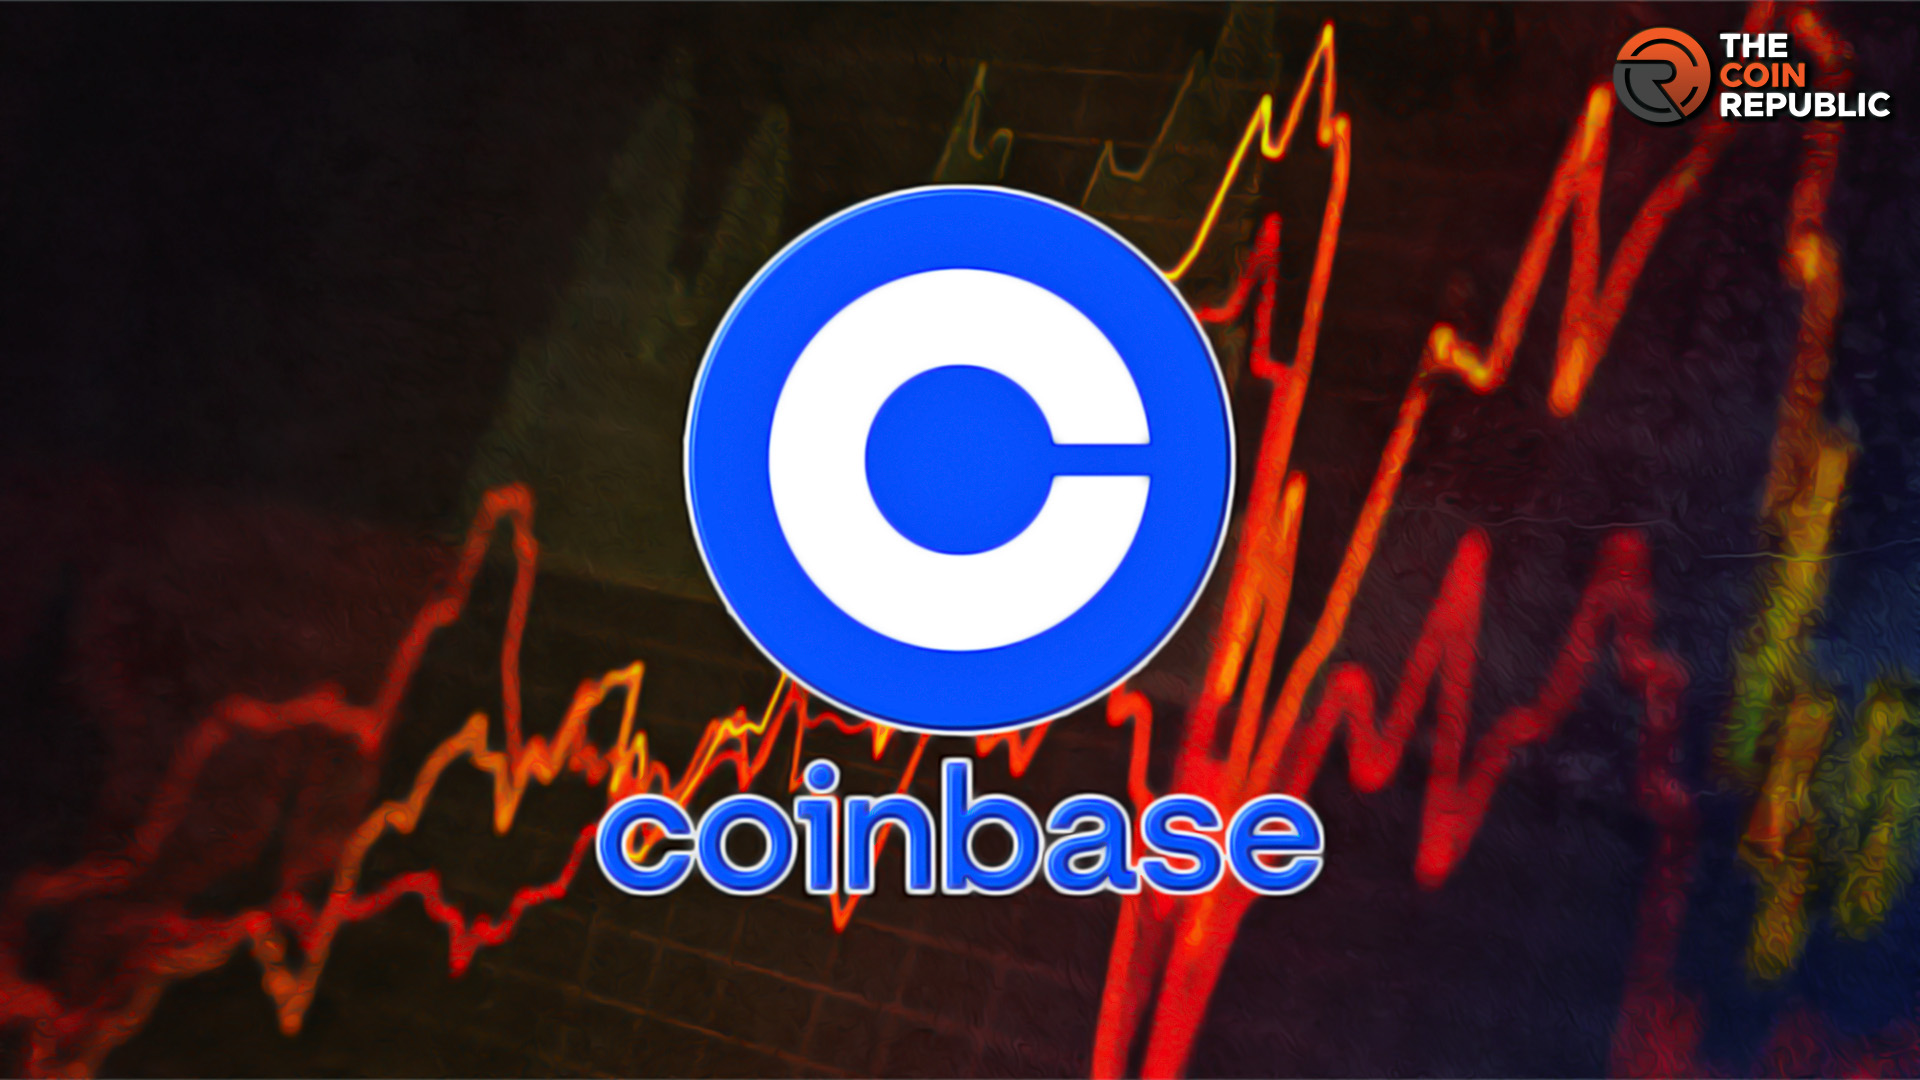 Coinbase Global Price Prediction: COIN Stock Faces SEC Lawsuit?